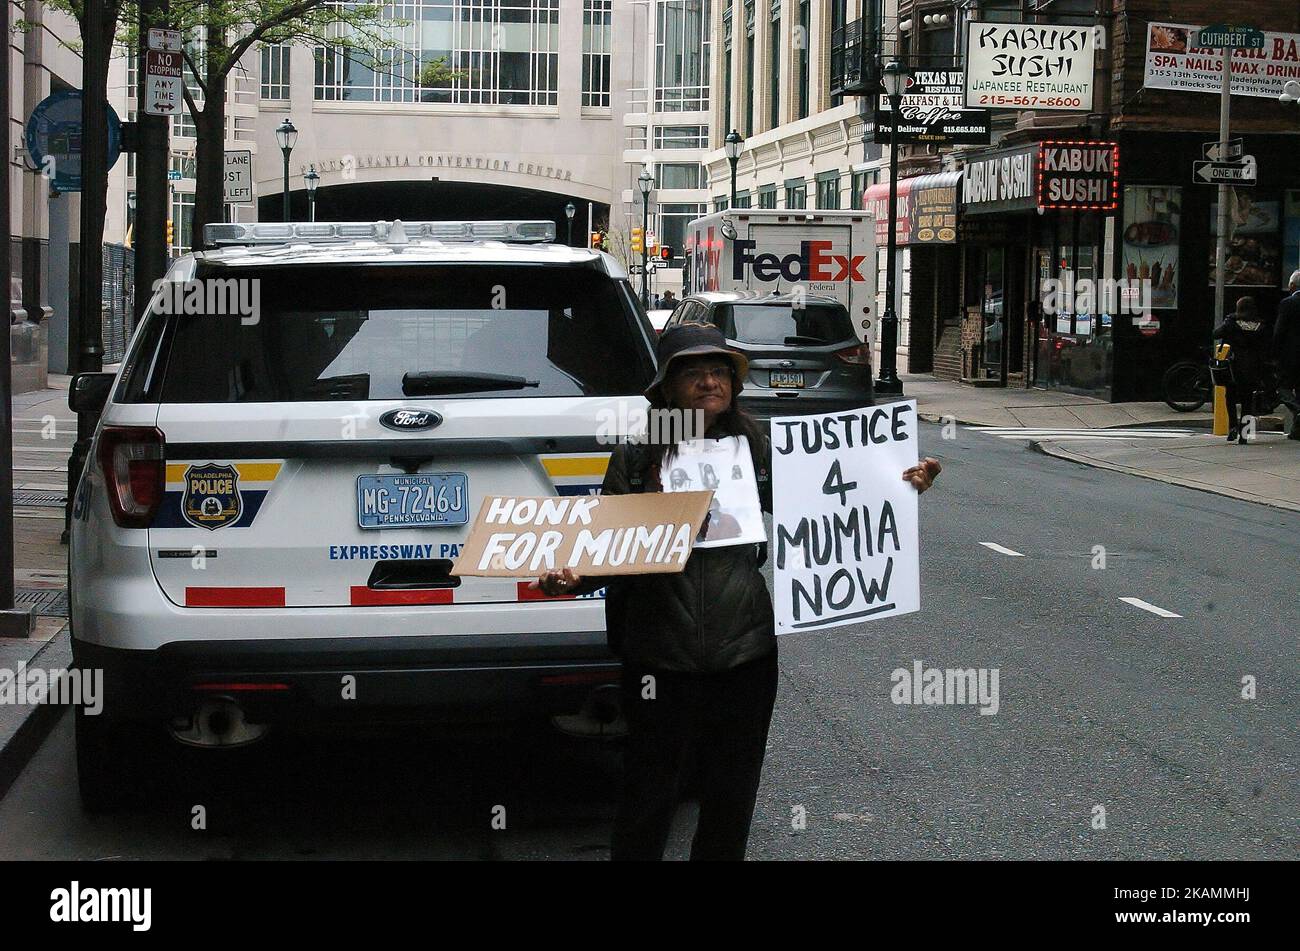 A protester stands behind a police care with signs demanding the release of and support for Mumia Abu-Jamal in Philadelphia, PA on April 24, 2017 Mumia was convicted in 1981 of the murder of police officer Daniel Faulkner. His supporters around the world hold firm that the conviction was wrongful and that the prosecution both fabricated evidence and withheld exculpatory evidence in the case against Mumia. (Photo by Cory Clark/NurPhoto) *** Please Use Credit from Credit Field *** Stock Photo